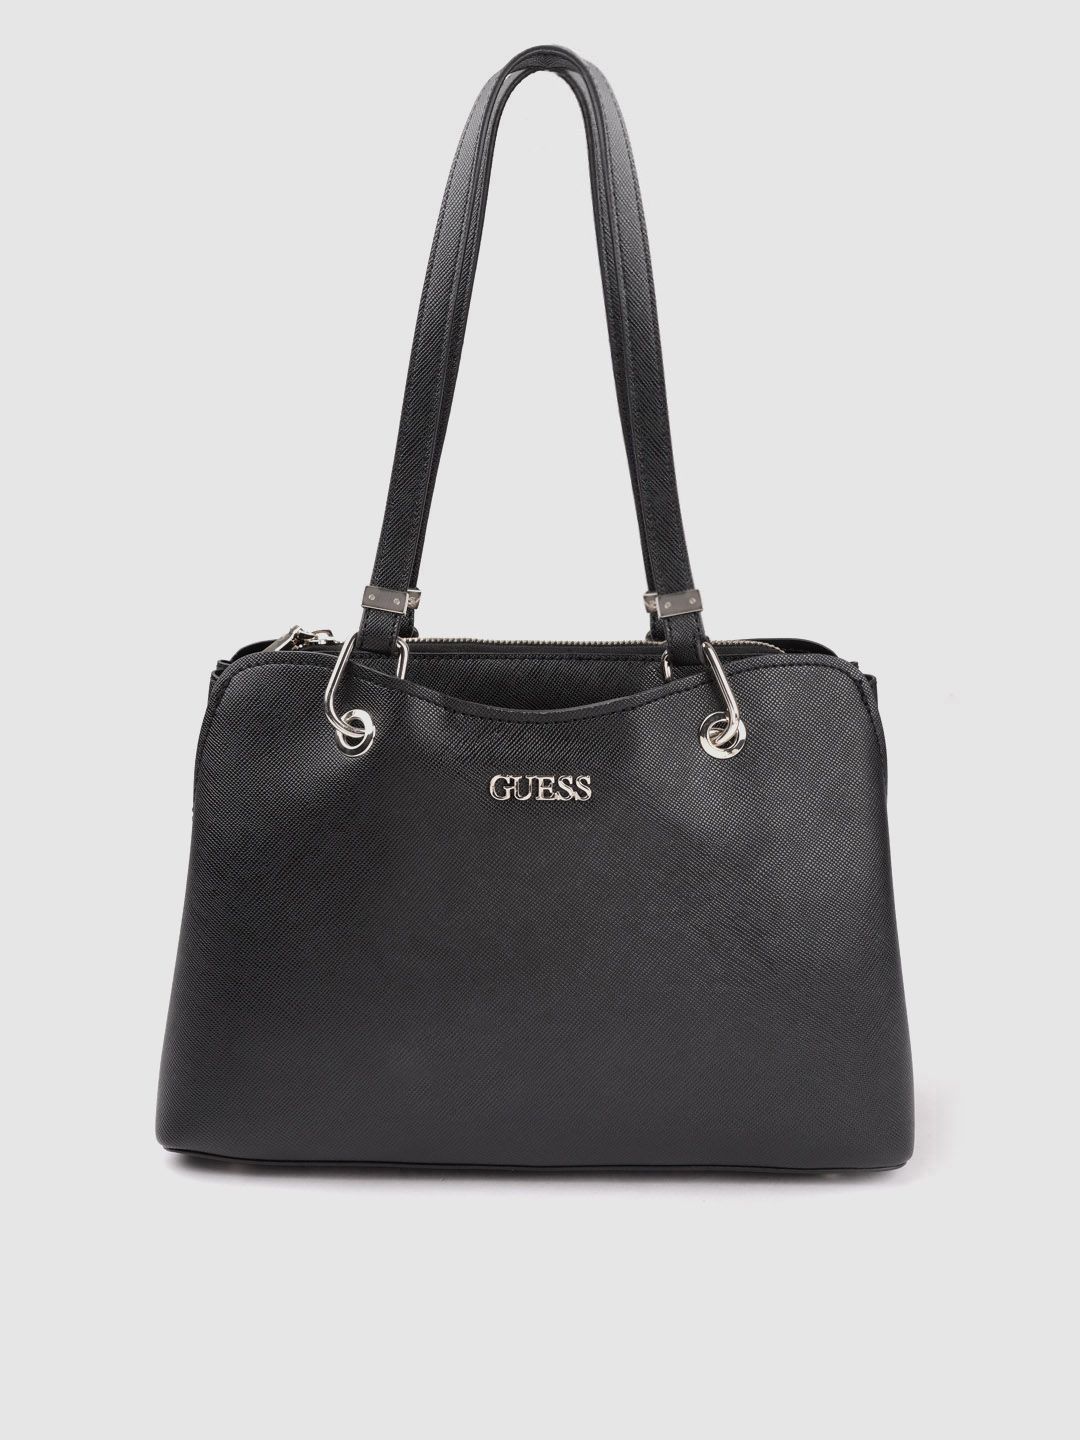 GUESS Black Saffiano Textured Shoulder Bag Price in India